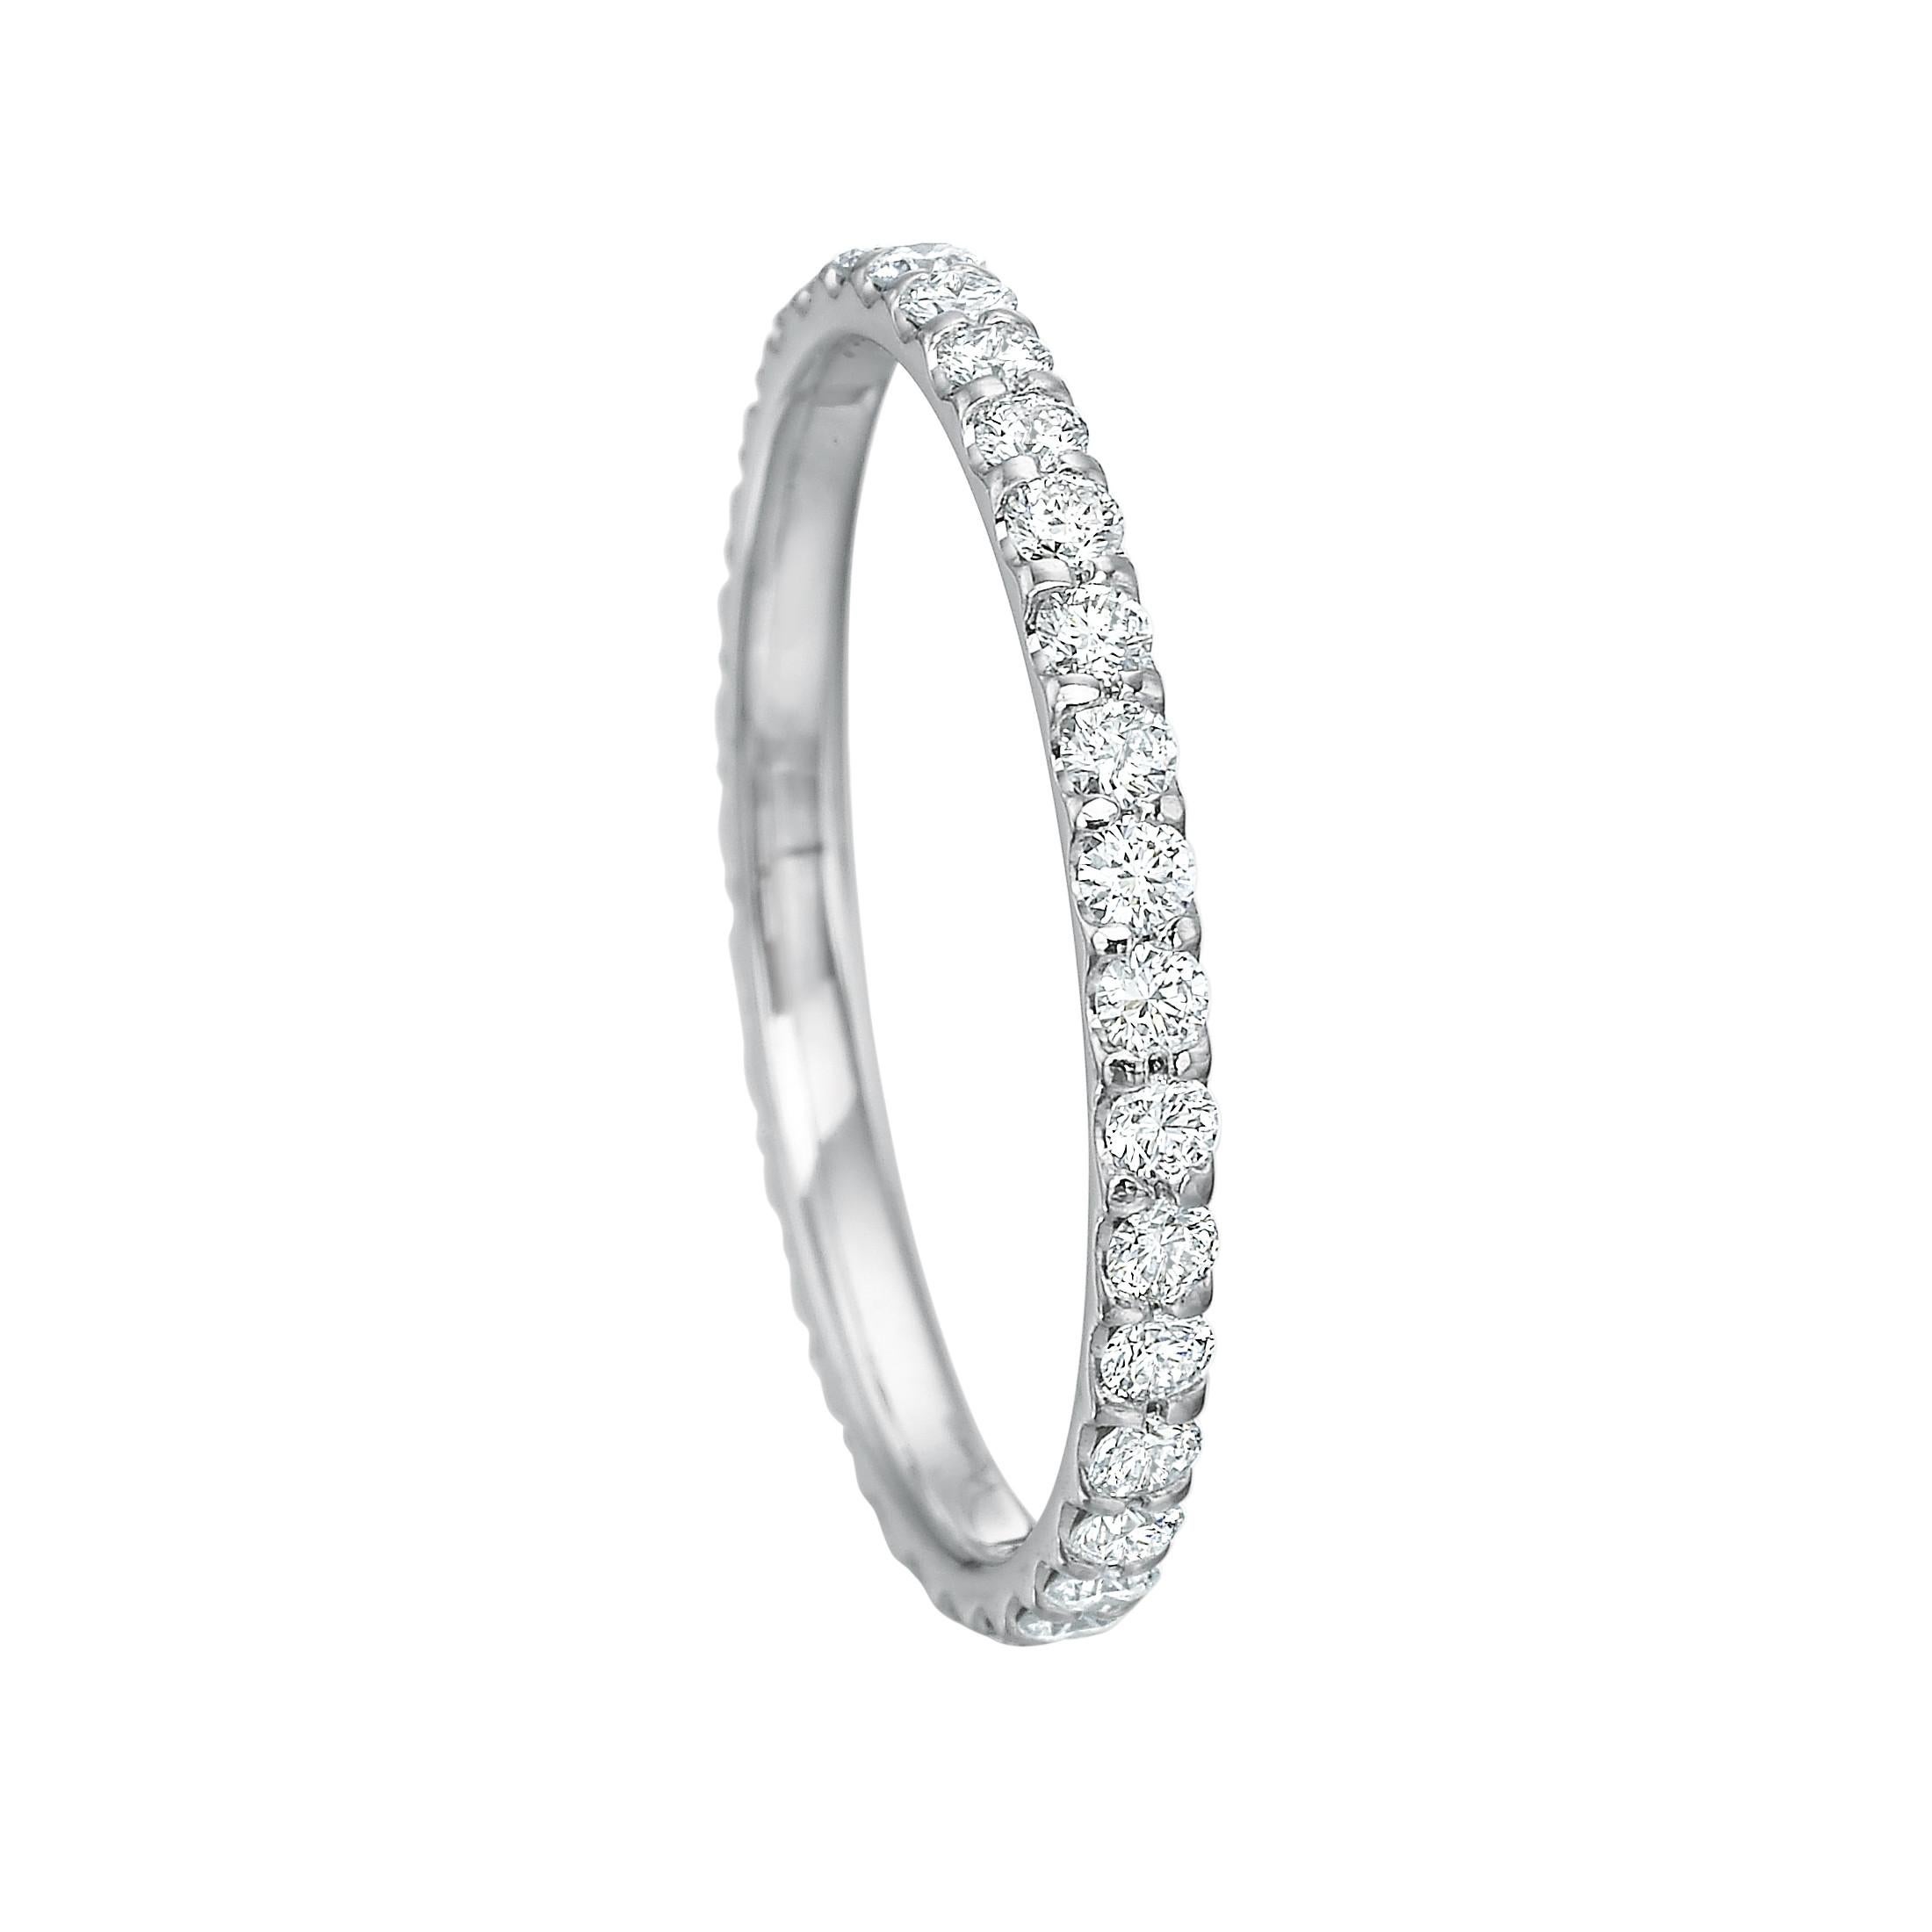 Diamond eternity band ring, showcasing round brilliant-cut diamonds set in a 'comfort fit' platinum mounting.

34 diamonds weighing 0.50 total carats
2mm wide
Size 6